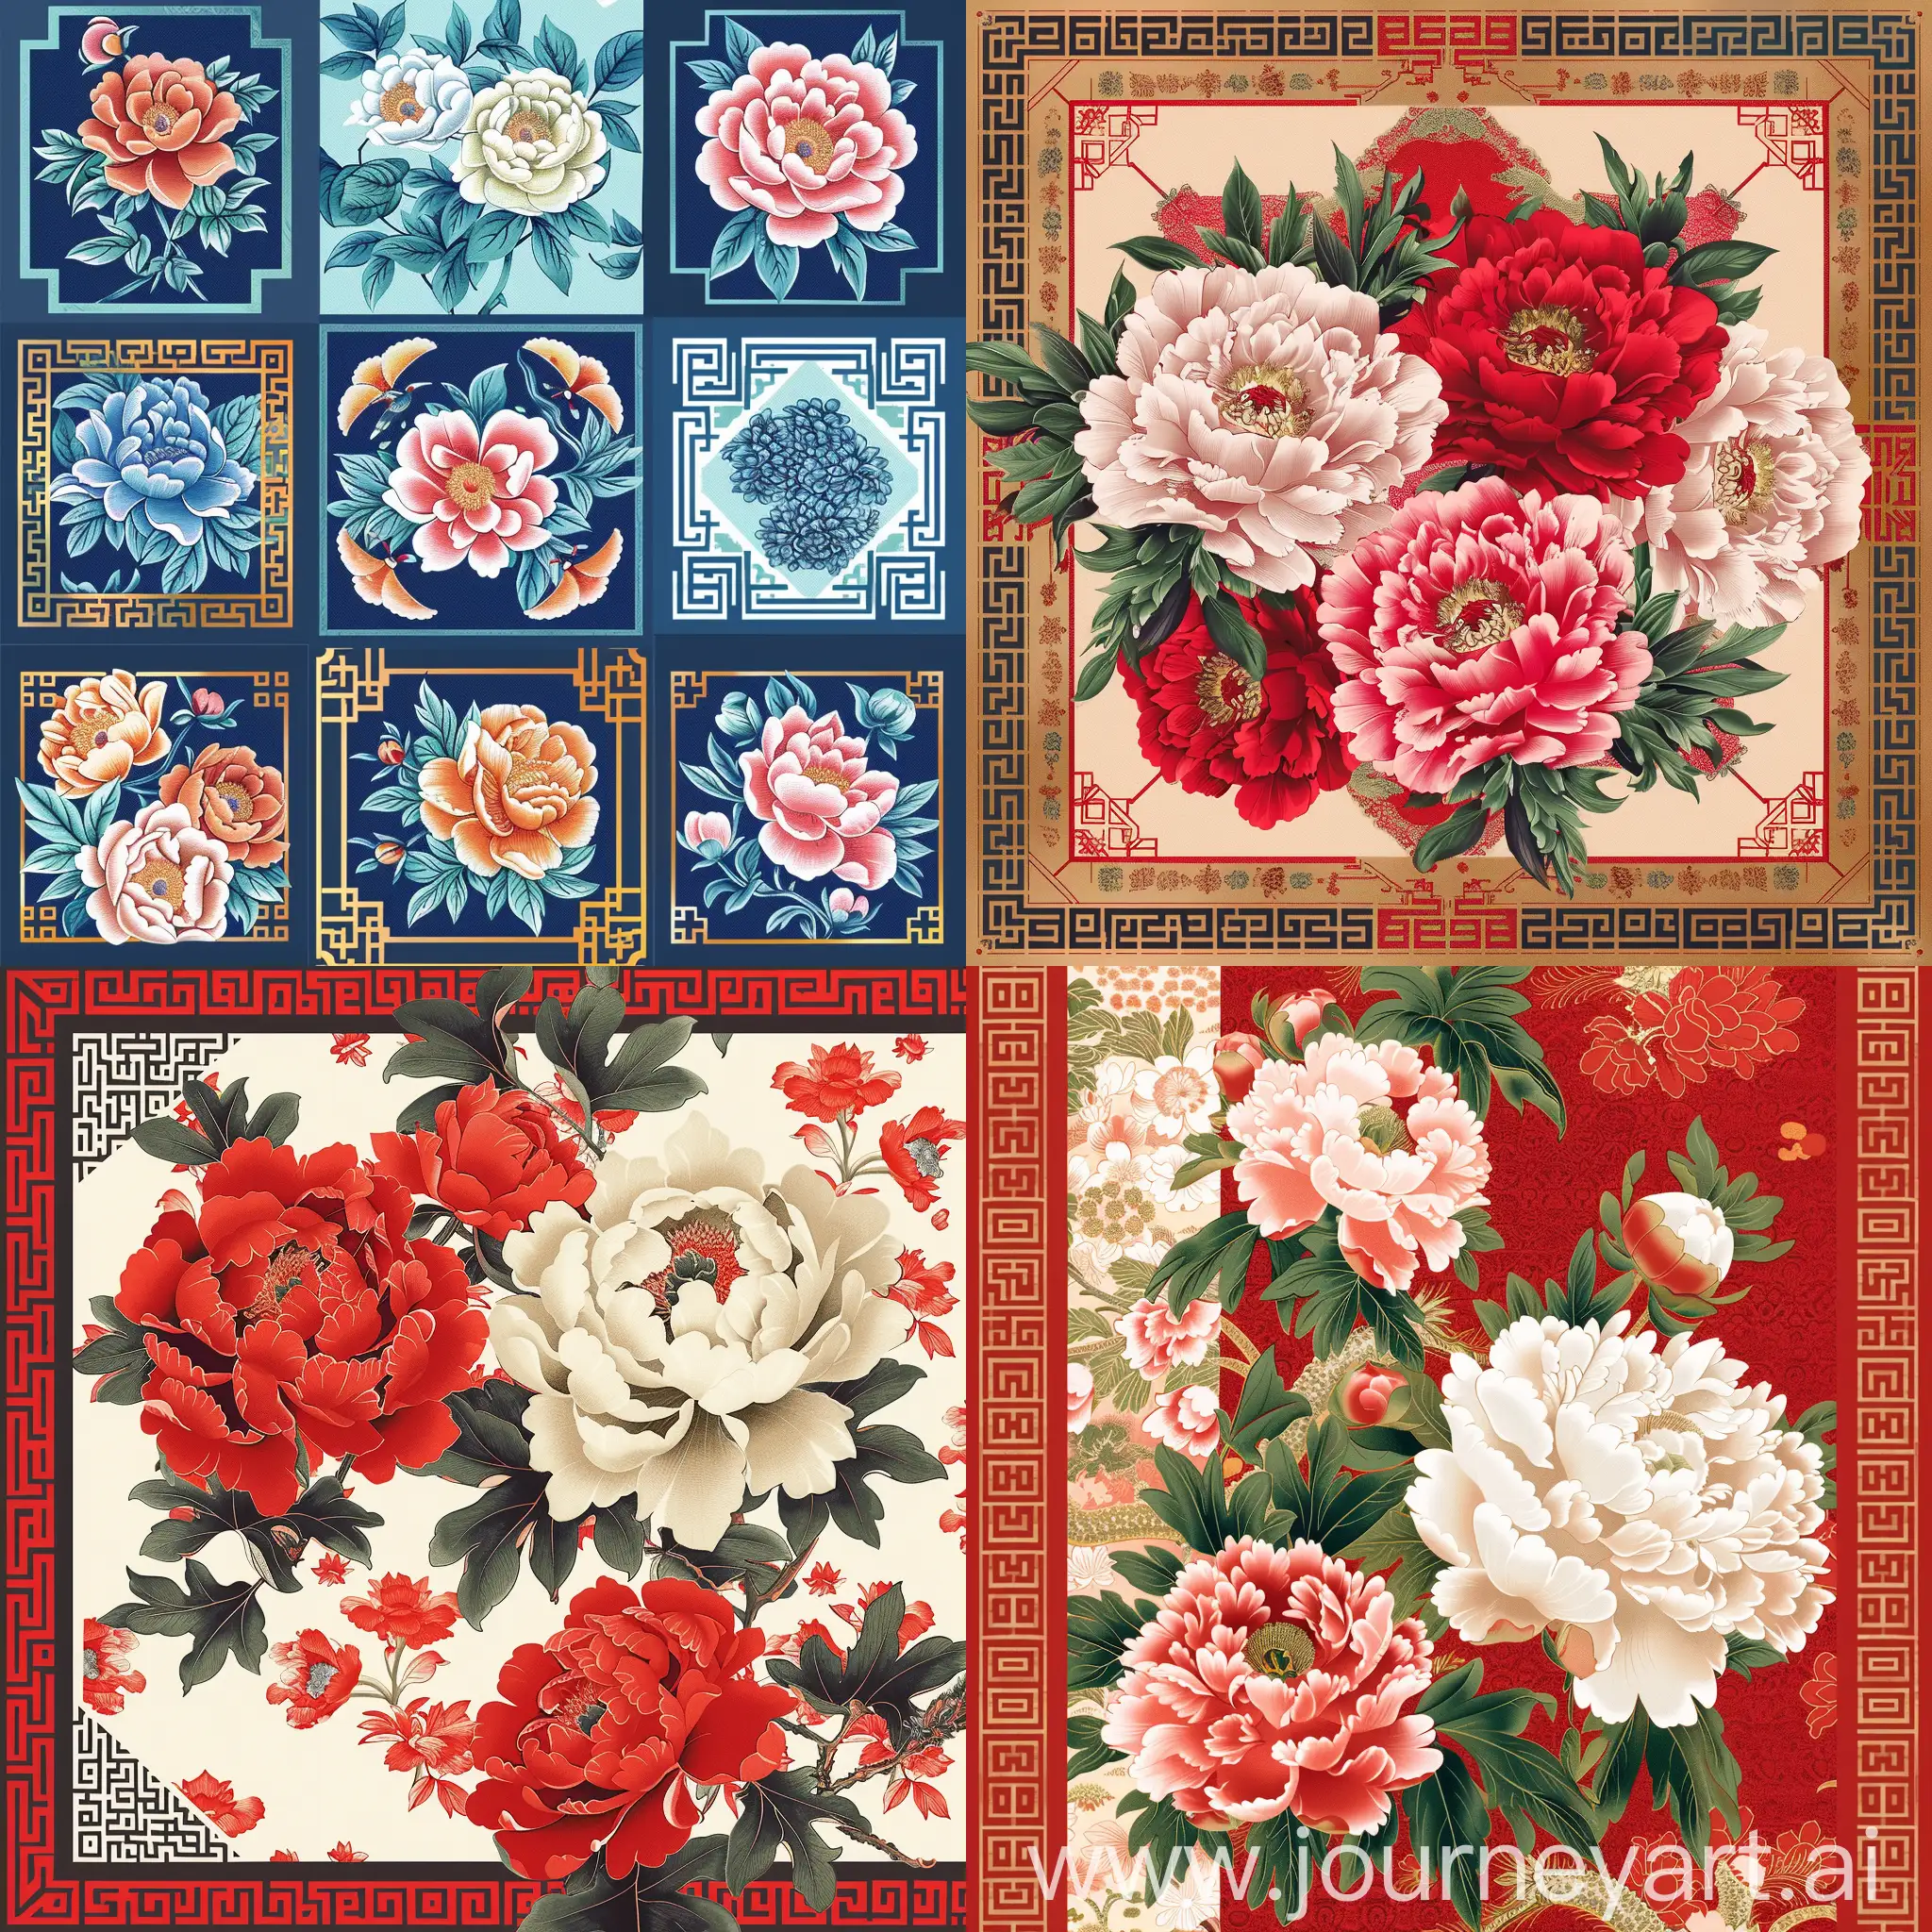 Auspicious-Peony-Motifs-and-Geometric-Patterns-in-Traditional-Chinese-Culture